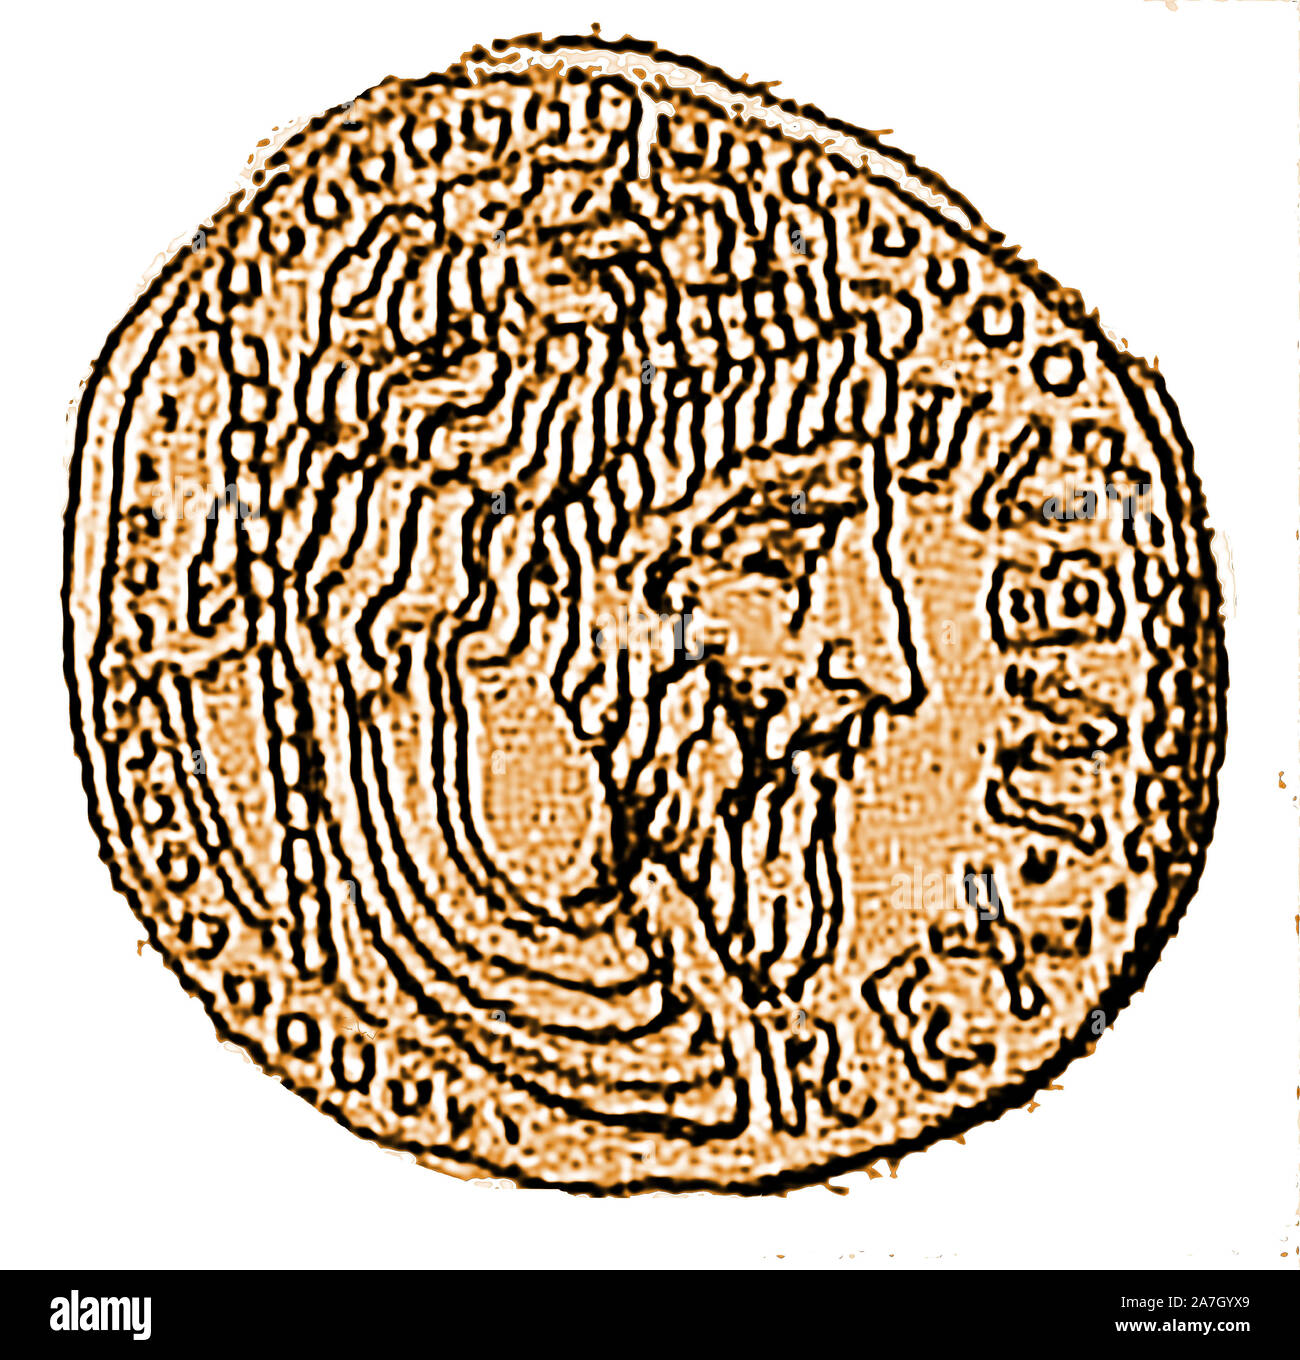 A coin portrait of King Juba I of Numidia, Africa during Roman ascendancy. He was father of the King of Numidia and later Mauretania, Juba II (50/52 BC – AD 23), father-in-law of Juba II’s wives Greek Ptolemaic princess Cleopatra Selene II , Cappodocian princess Glaphyra and paternal grandfather to King Ptolemy of Mauretania  and the princess Drusilla of Mauretania the Elder Stock Photo